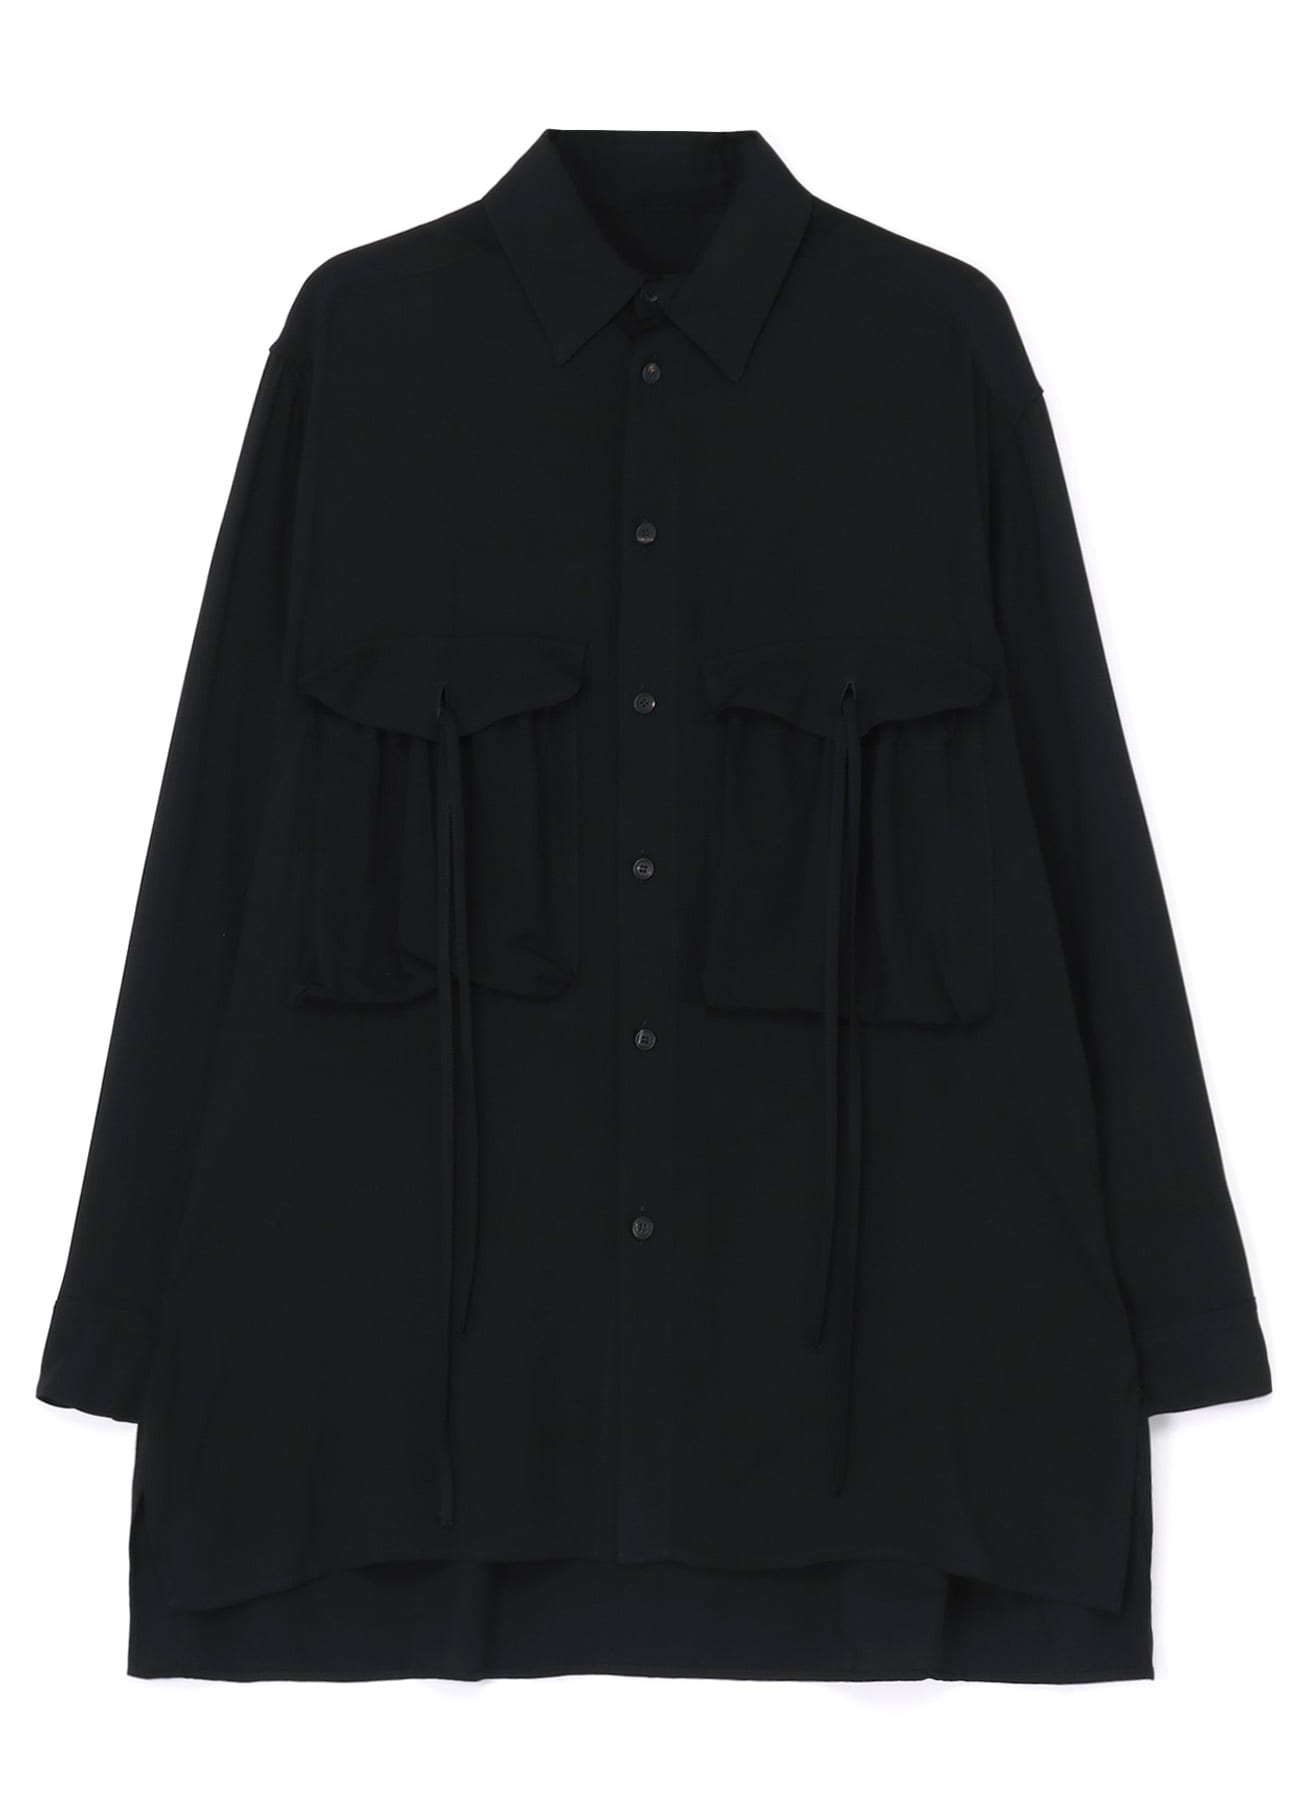 RAYON WASHER TWILL SHIRT WITH GATHERED POCKETS(M Black): S'YTE 